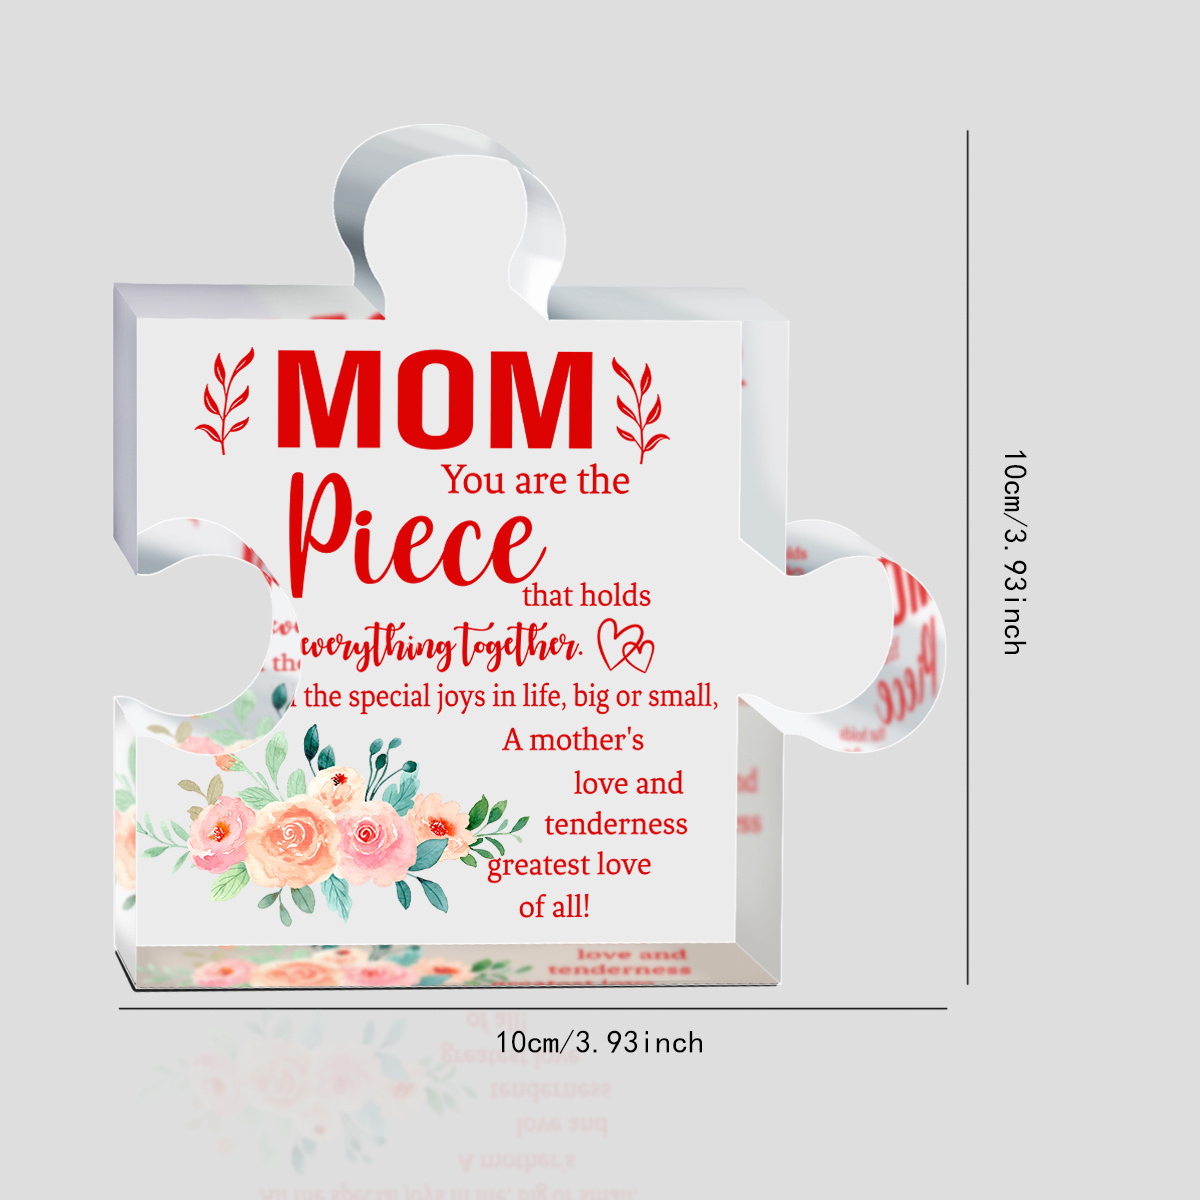 1pc Gifts For Bonus Mom, Birthday Gifts For Step Mom From Step Daughter  Son, Mother's Day Christmas Thanksgiving Present For Mom Stepmom Gift Idea,  Th